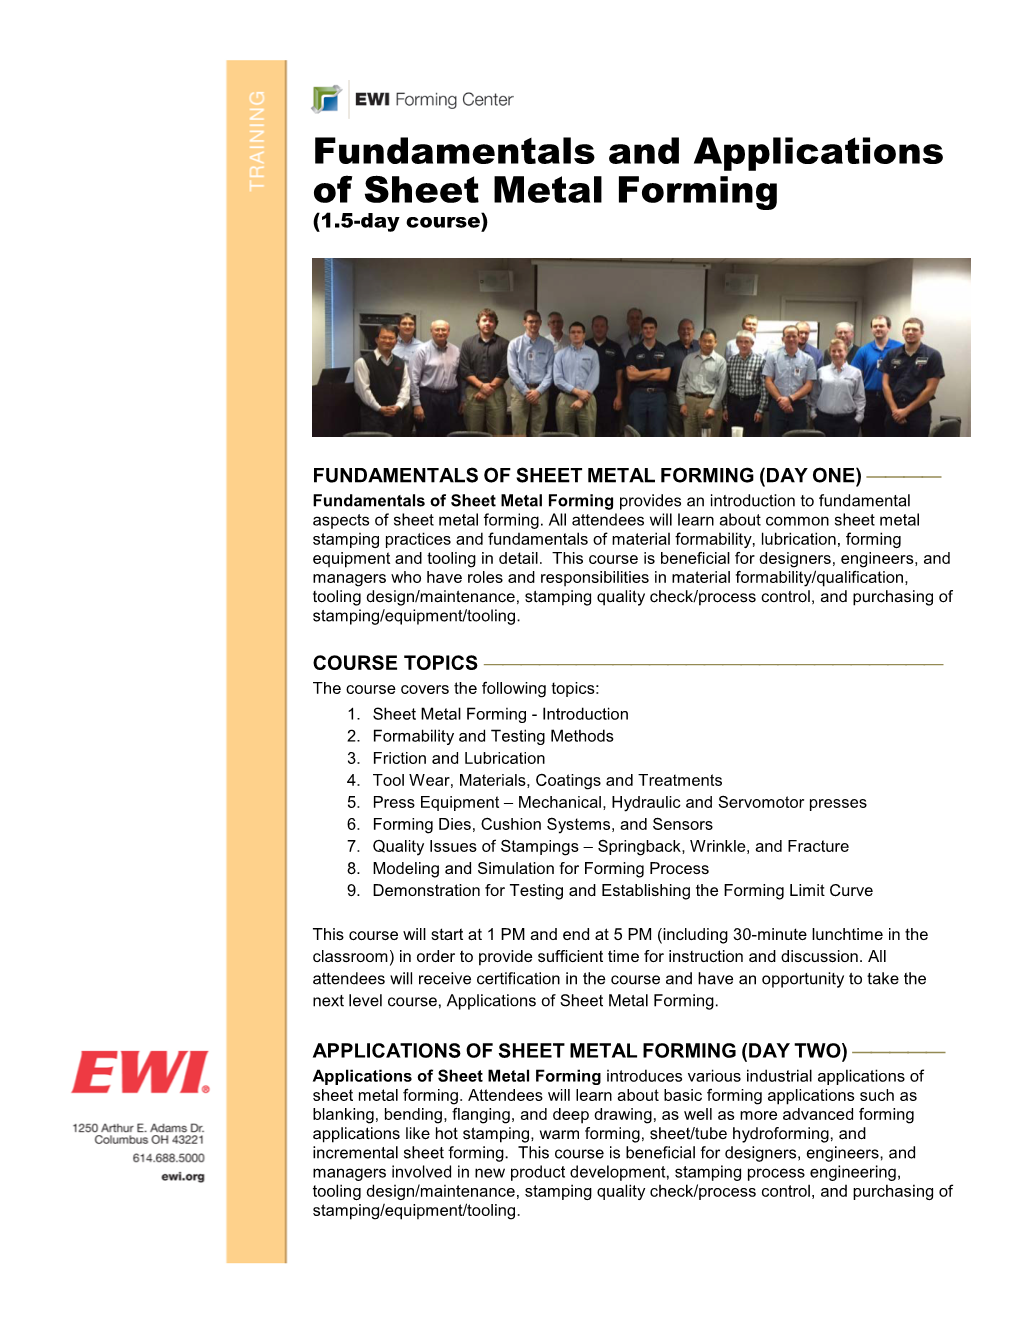 Sheet Metal Forming (1.5-Day Course)